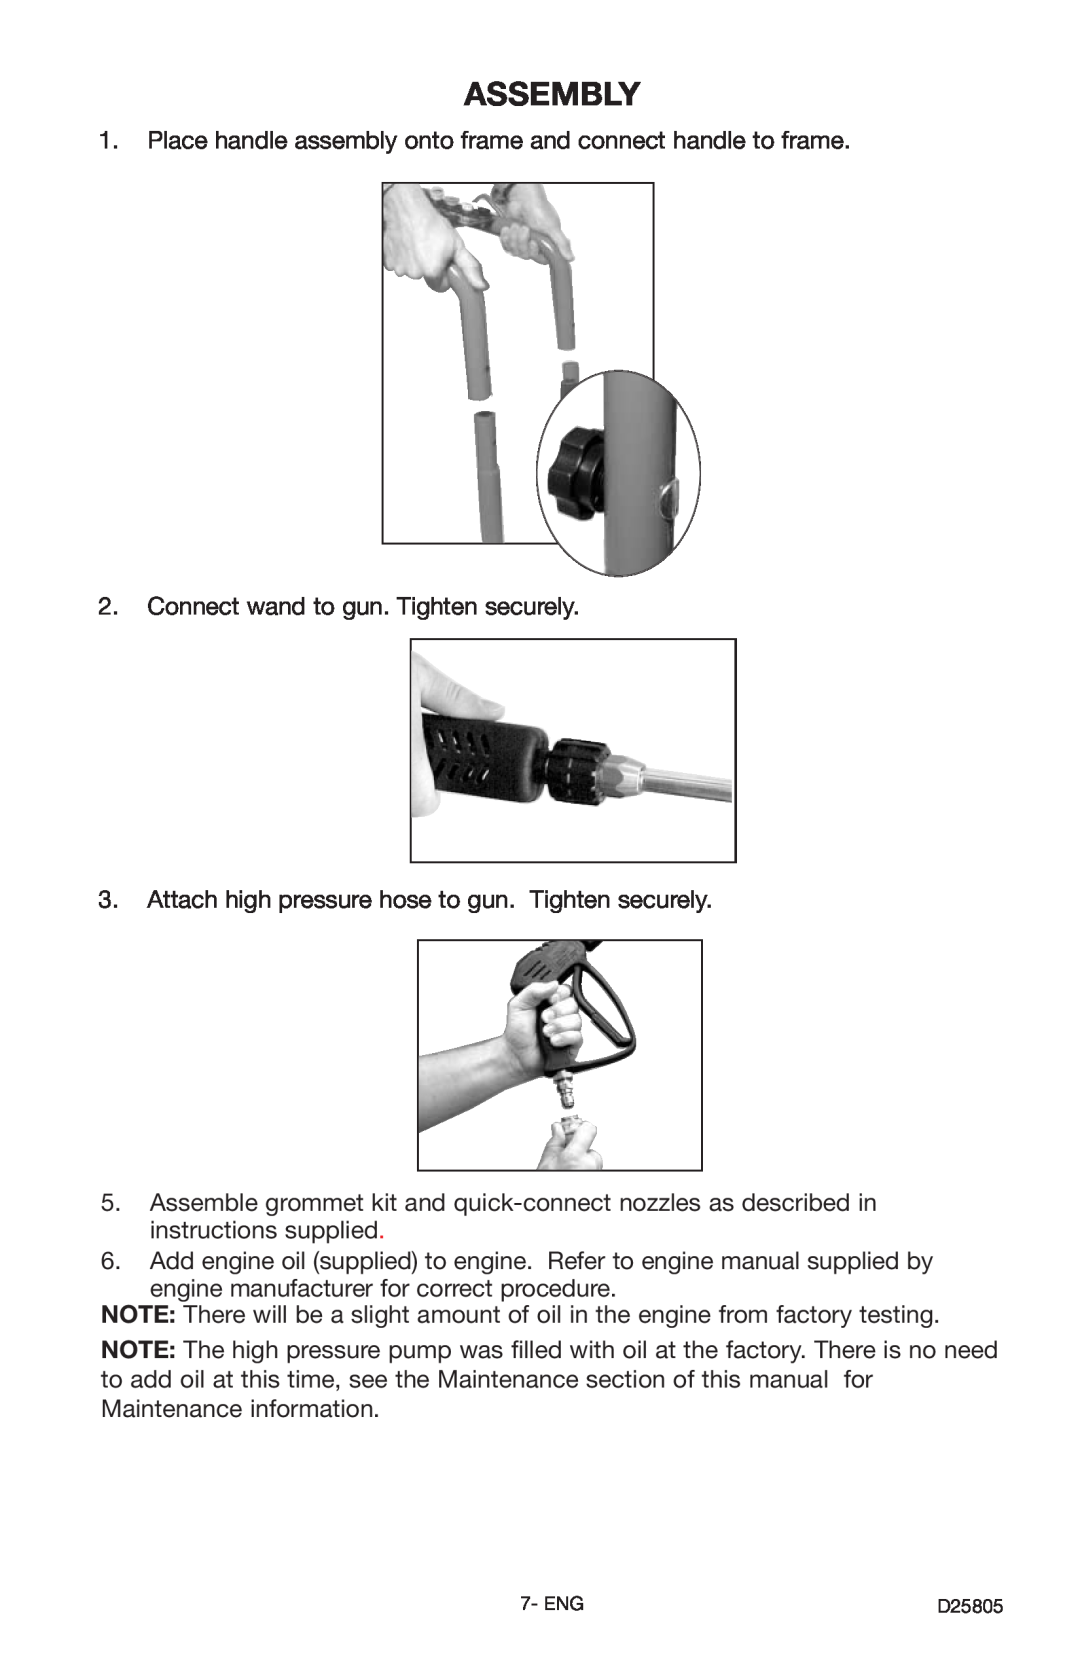 Porter-Cable PCH3500C, D25805-025-1 instruction manual Assembly 